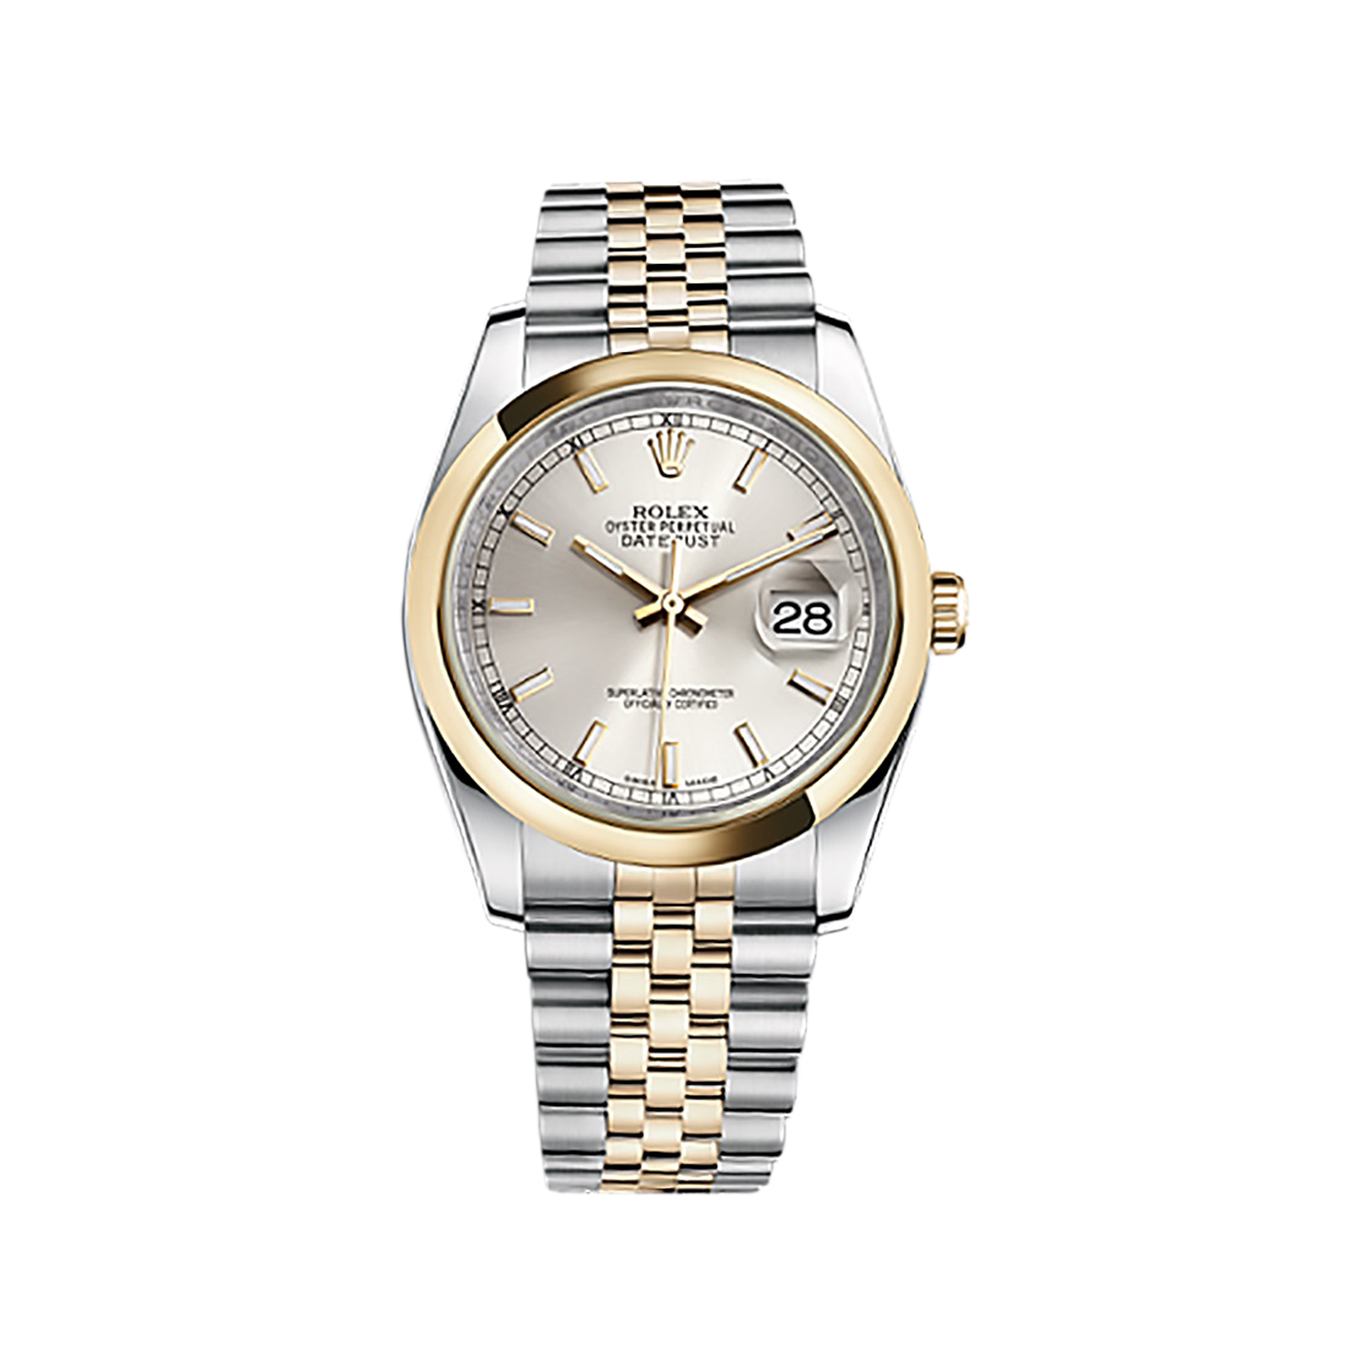 Datejust 36 116203 Gold & Stainless Steel Watch (Silver)